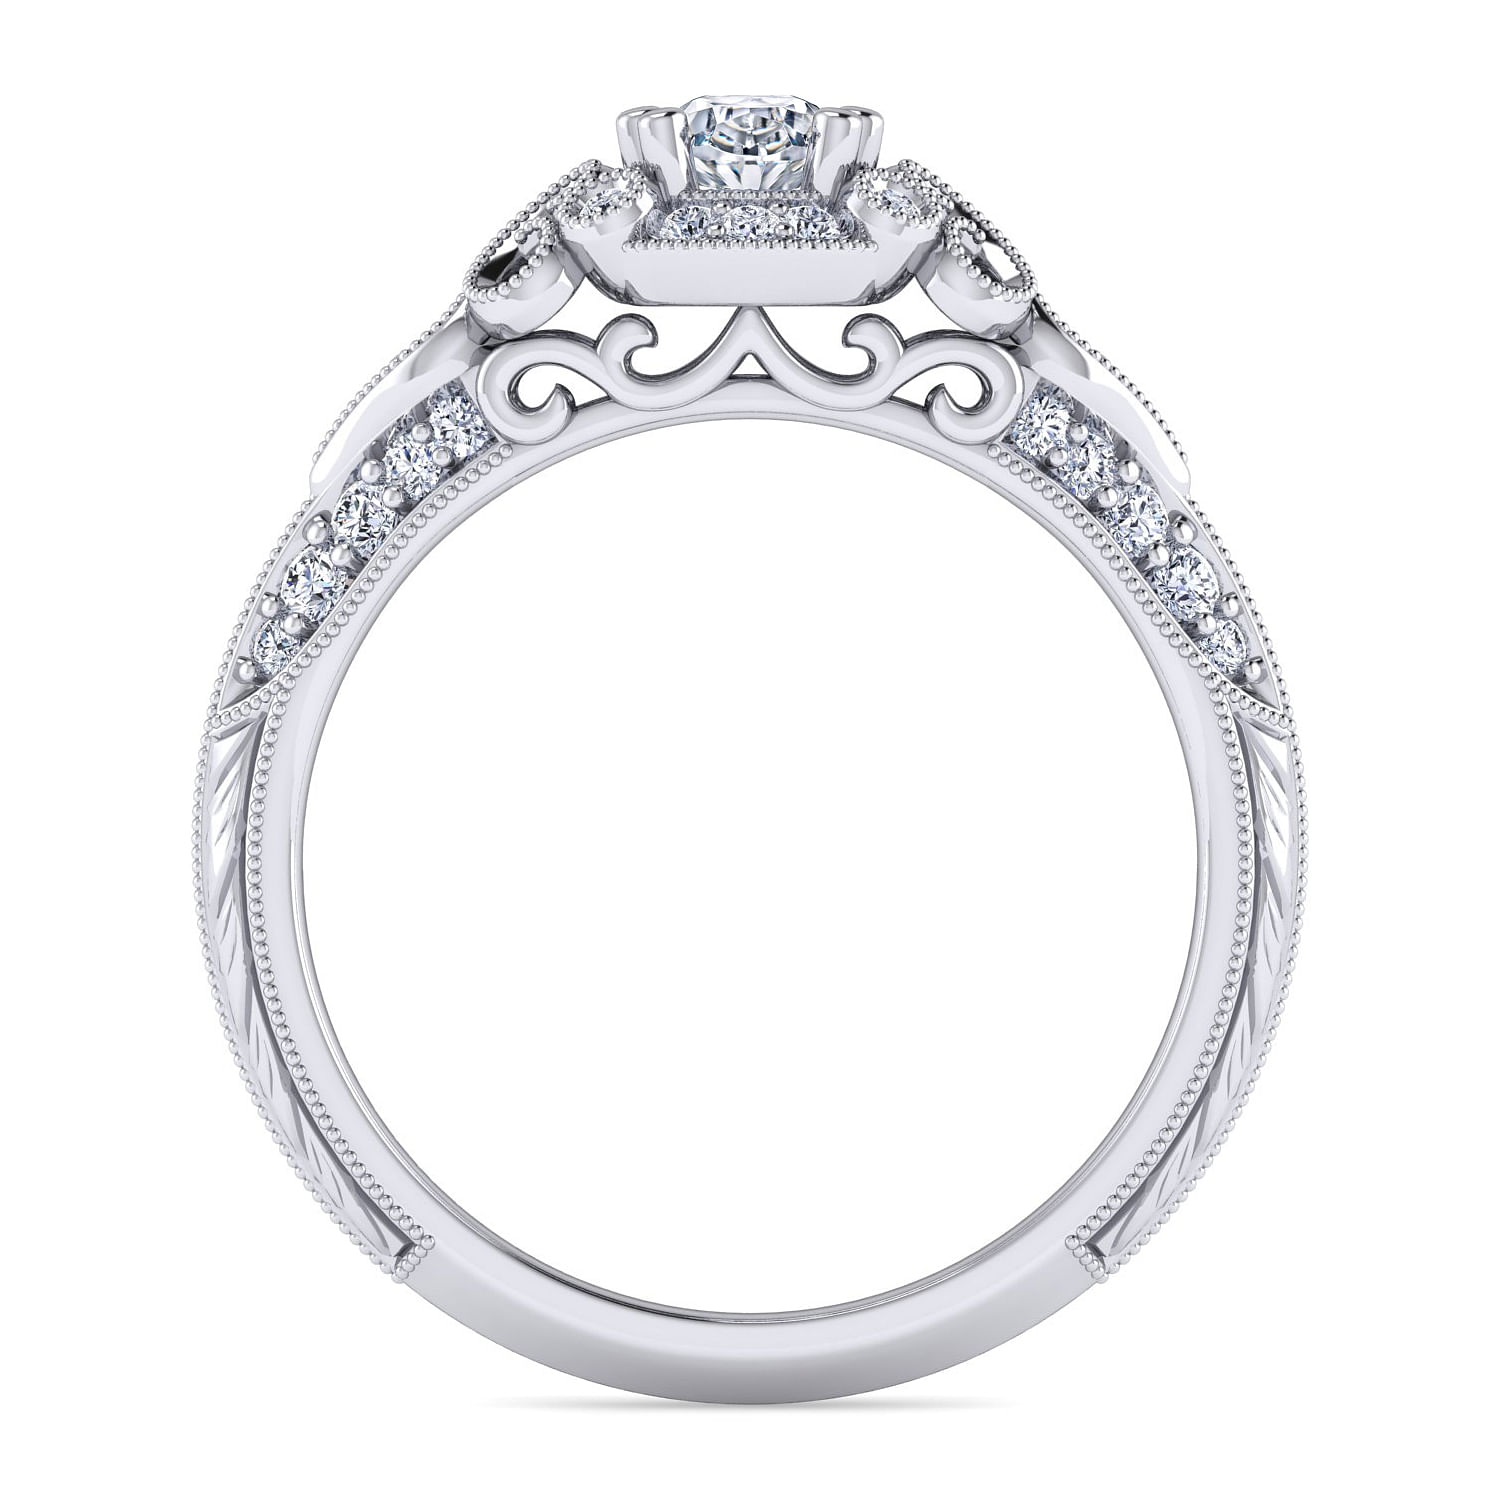 Unique 14K White Gold Vintage Inspired Oval Diamond Halo Engagement Ring